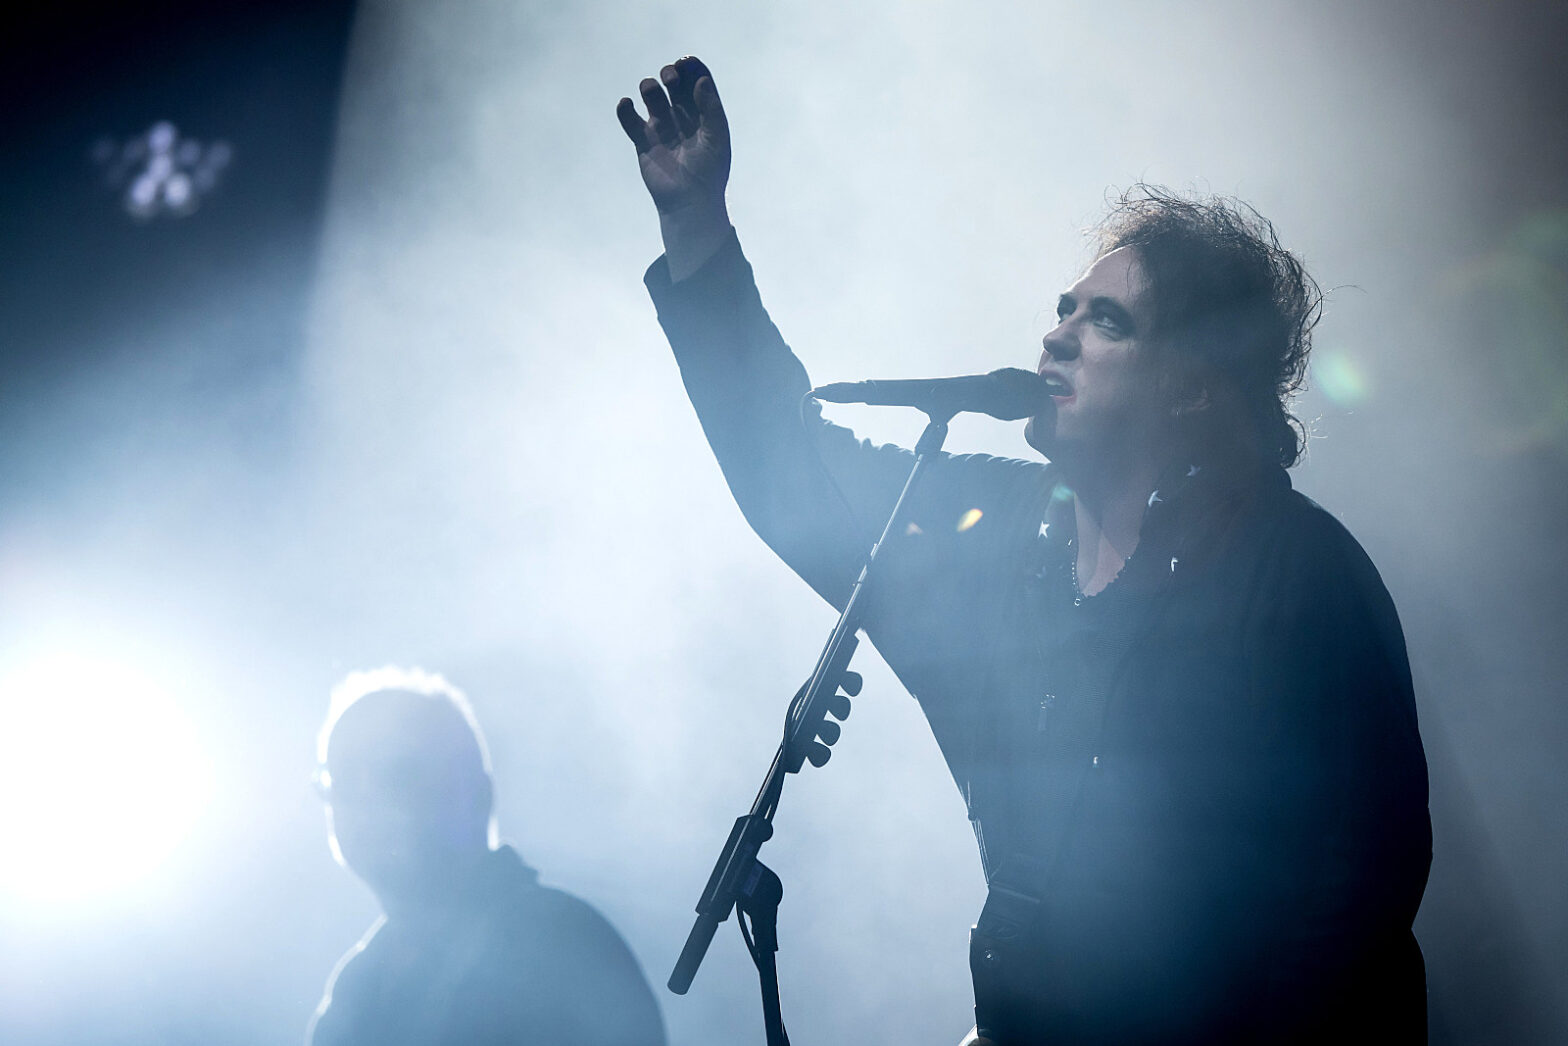 the-cure-launches-first-us-tour-in-7-years:-videos-and-set-list